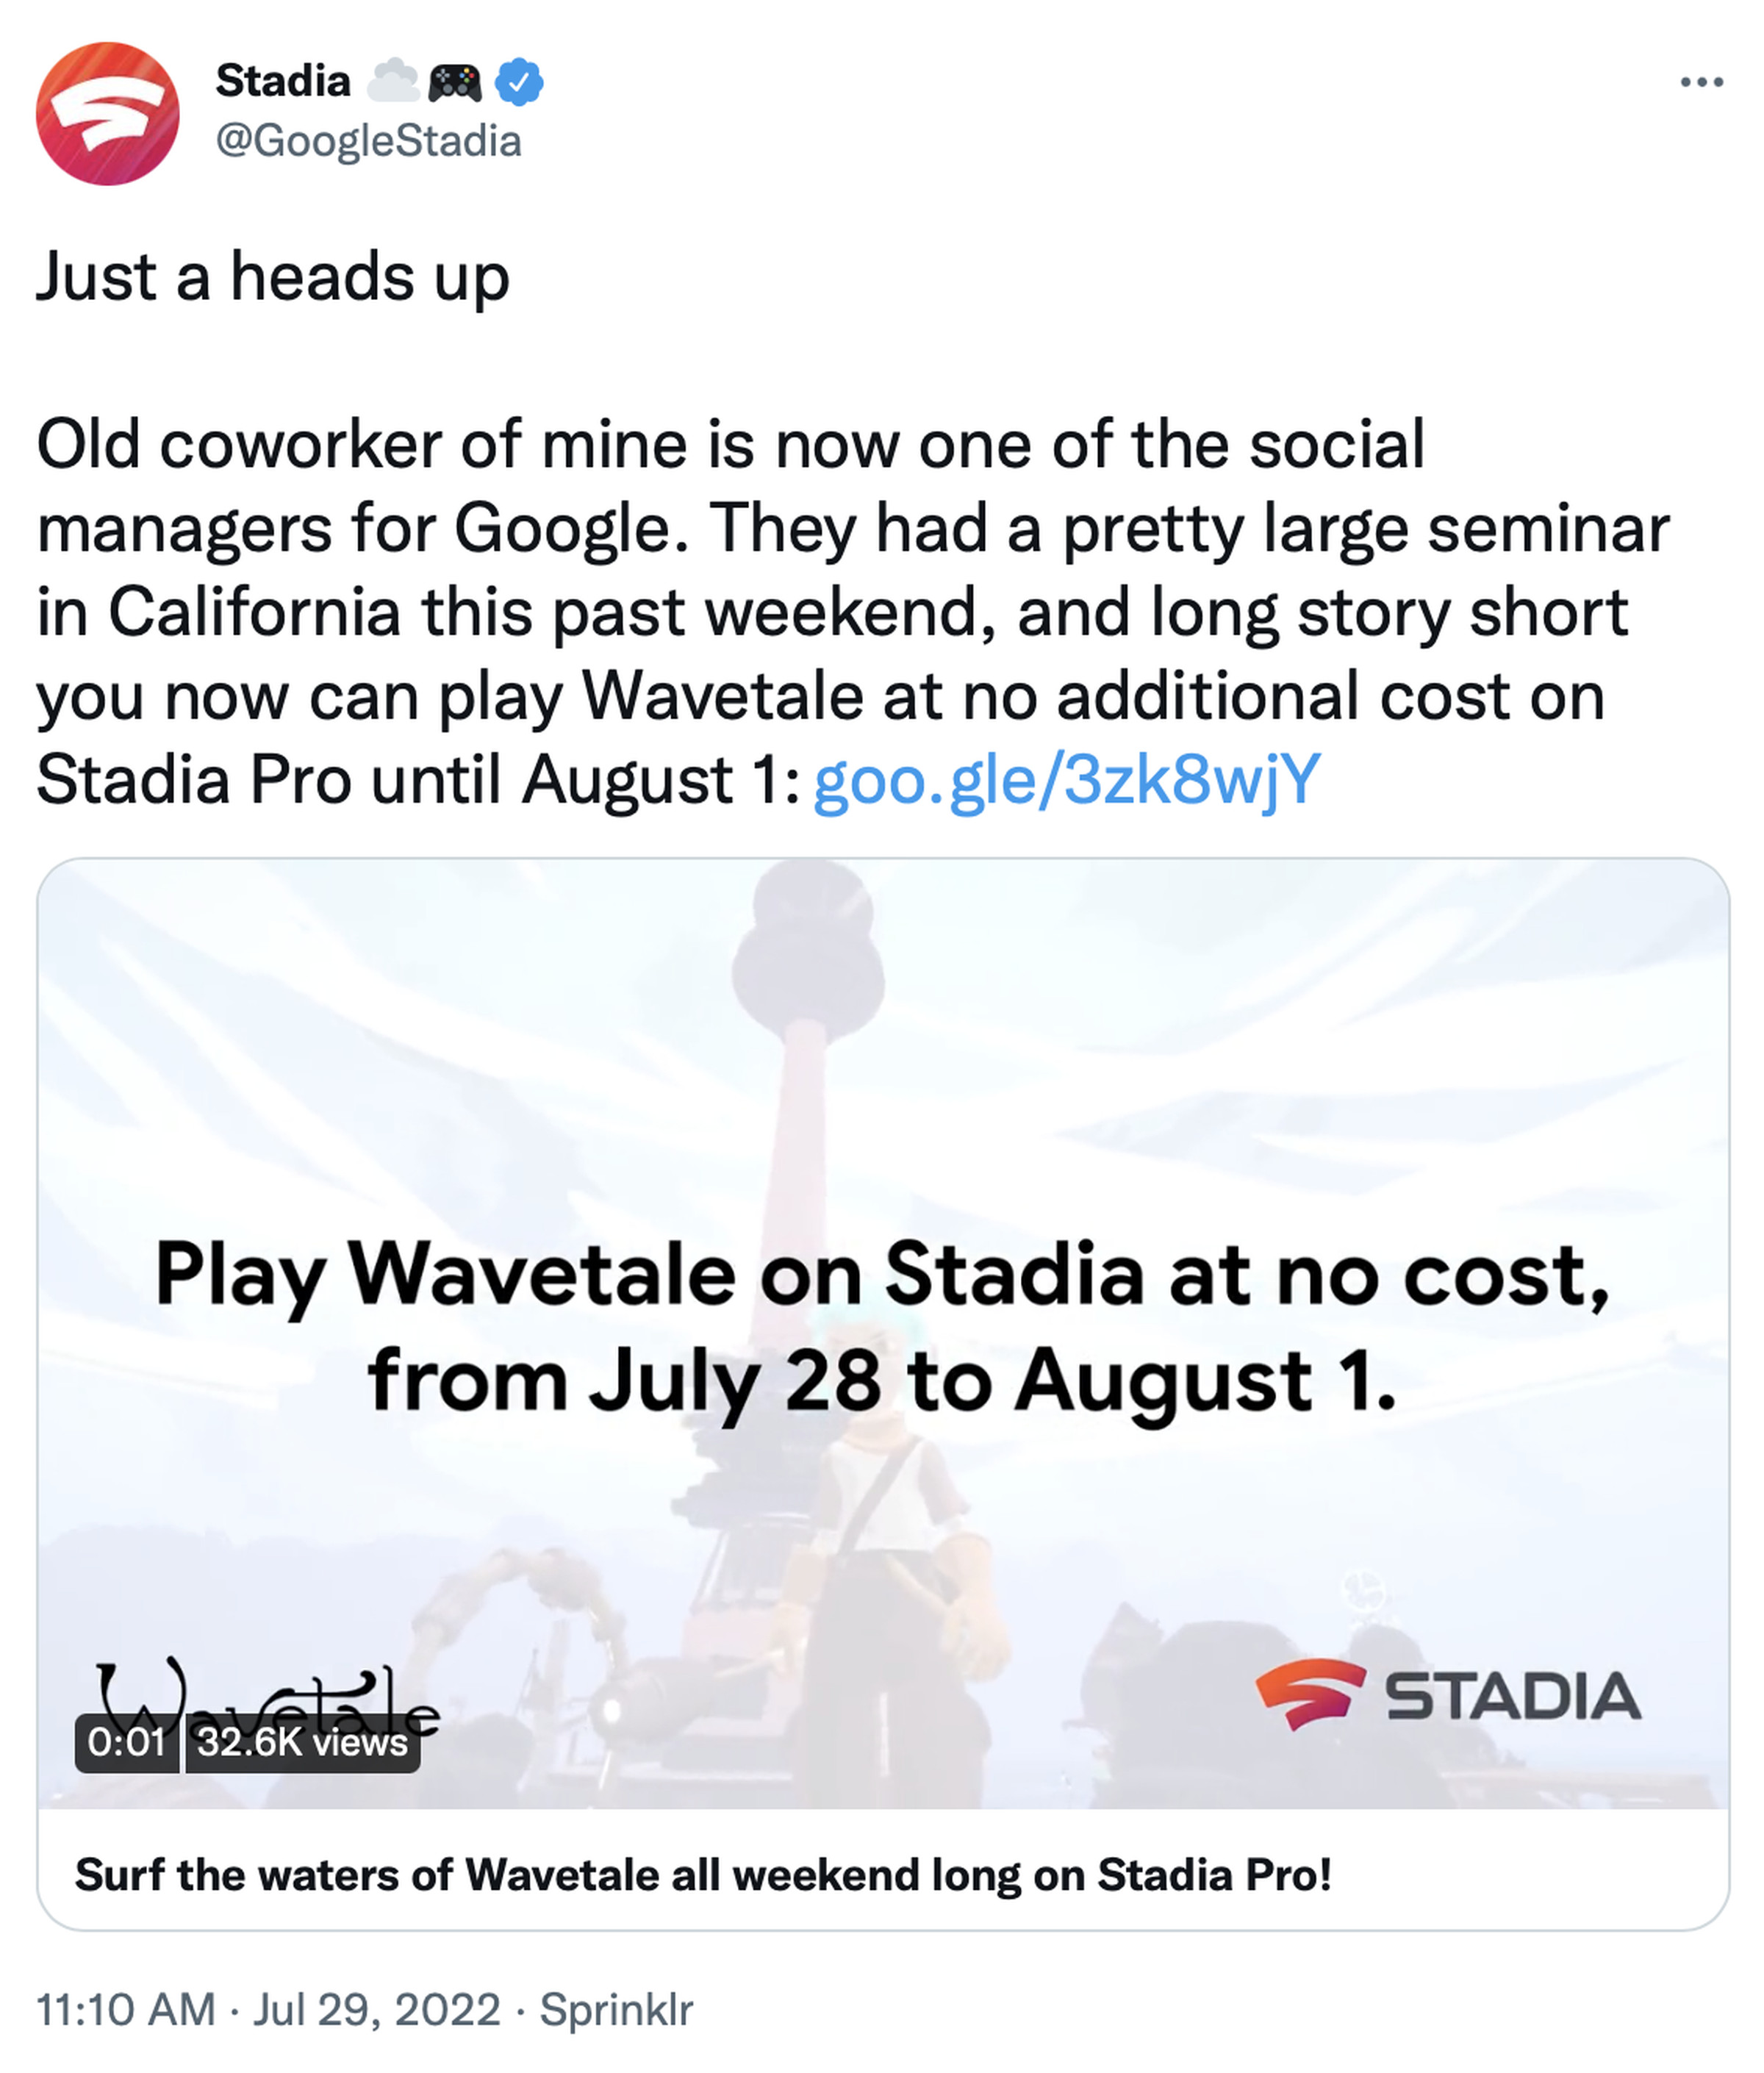 Image of a tweet from Google Stadia, reading: Just a heads up Old coworker of mine is now one of the social managers for Google. They had a pretty large seminar in California this past weekend, and long story short you now can play Wavetale at no additional cost on Stadia Pro until August 1